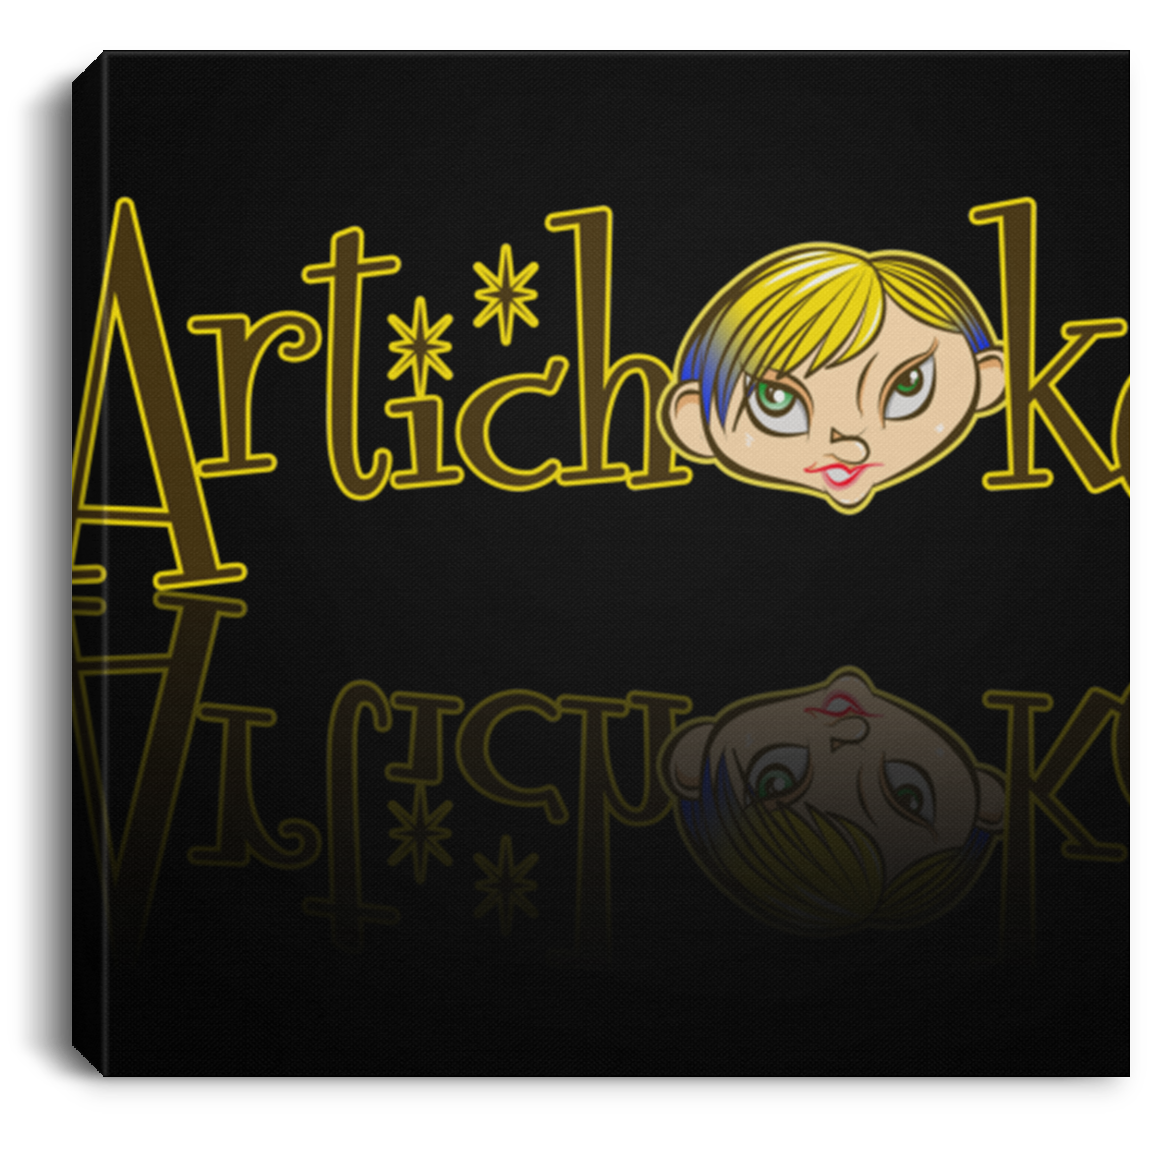 ArtichokeUSA Character and Font design #21. Friends, Clients, and People of Earth. Let's Create Your Own Design Today. Square Canvas .75in Frame